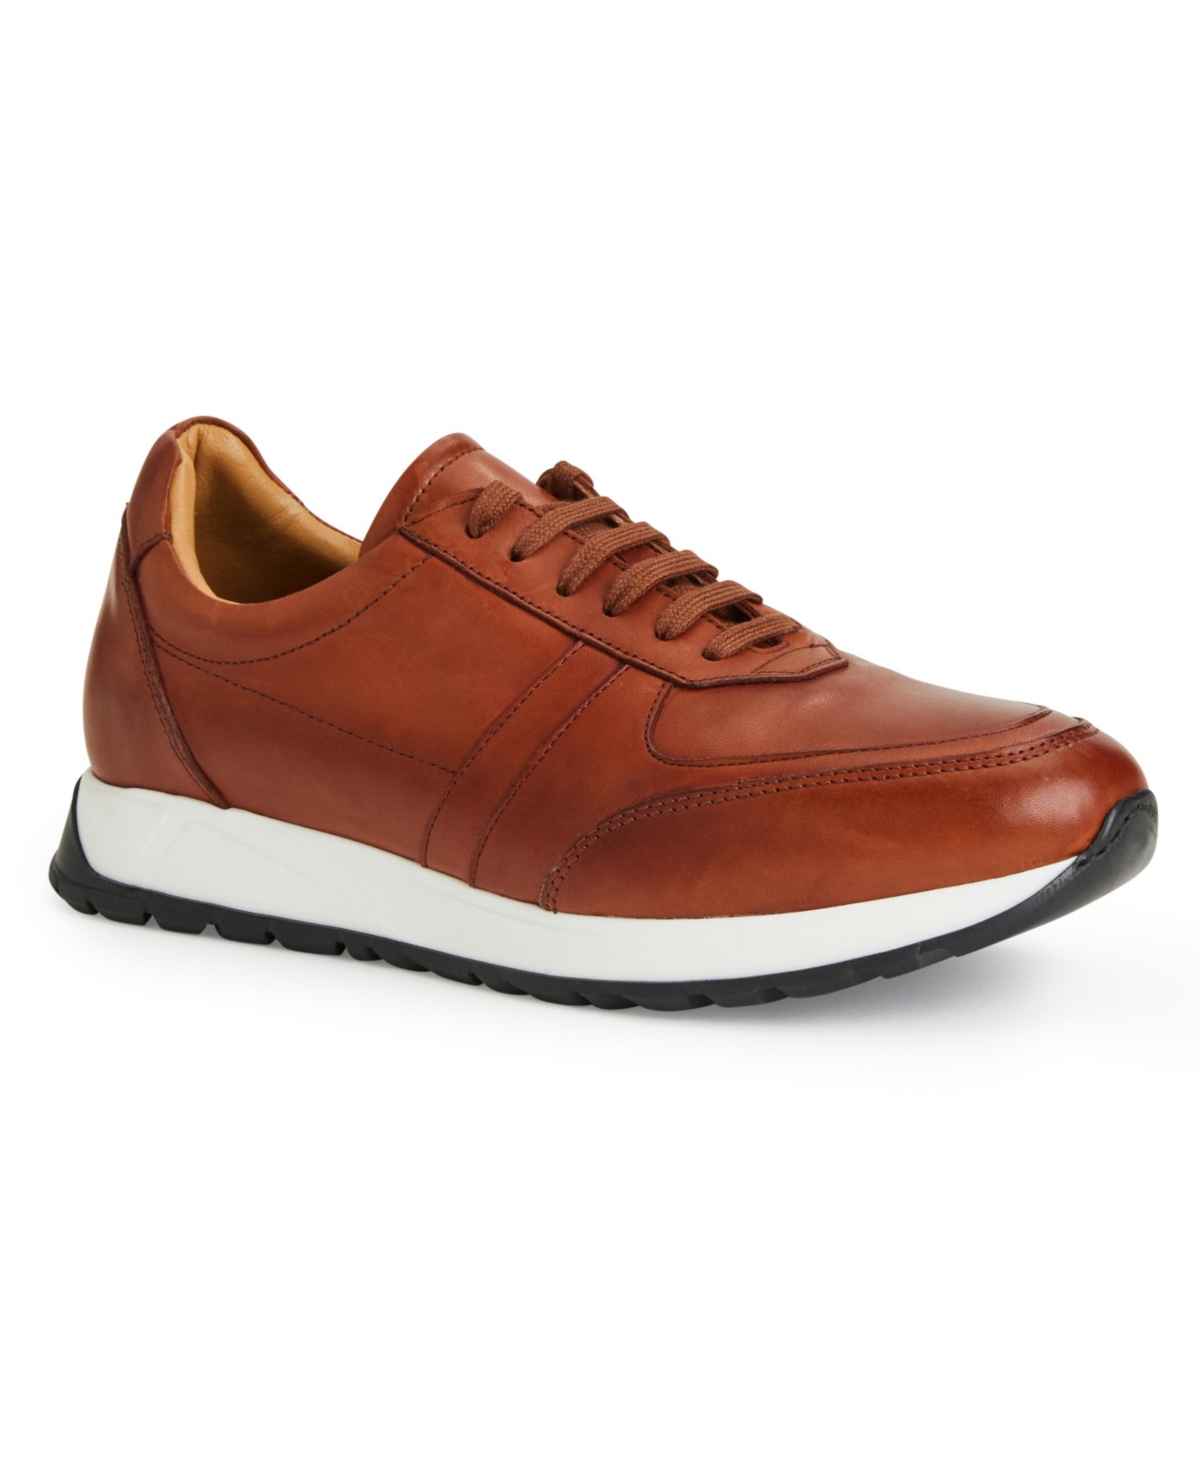 BRUNO MAGLI MEN'S ACE SUEDE AND LEATHER ATHLETIC LACE-UP SNEAKERS